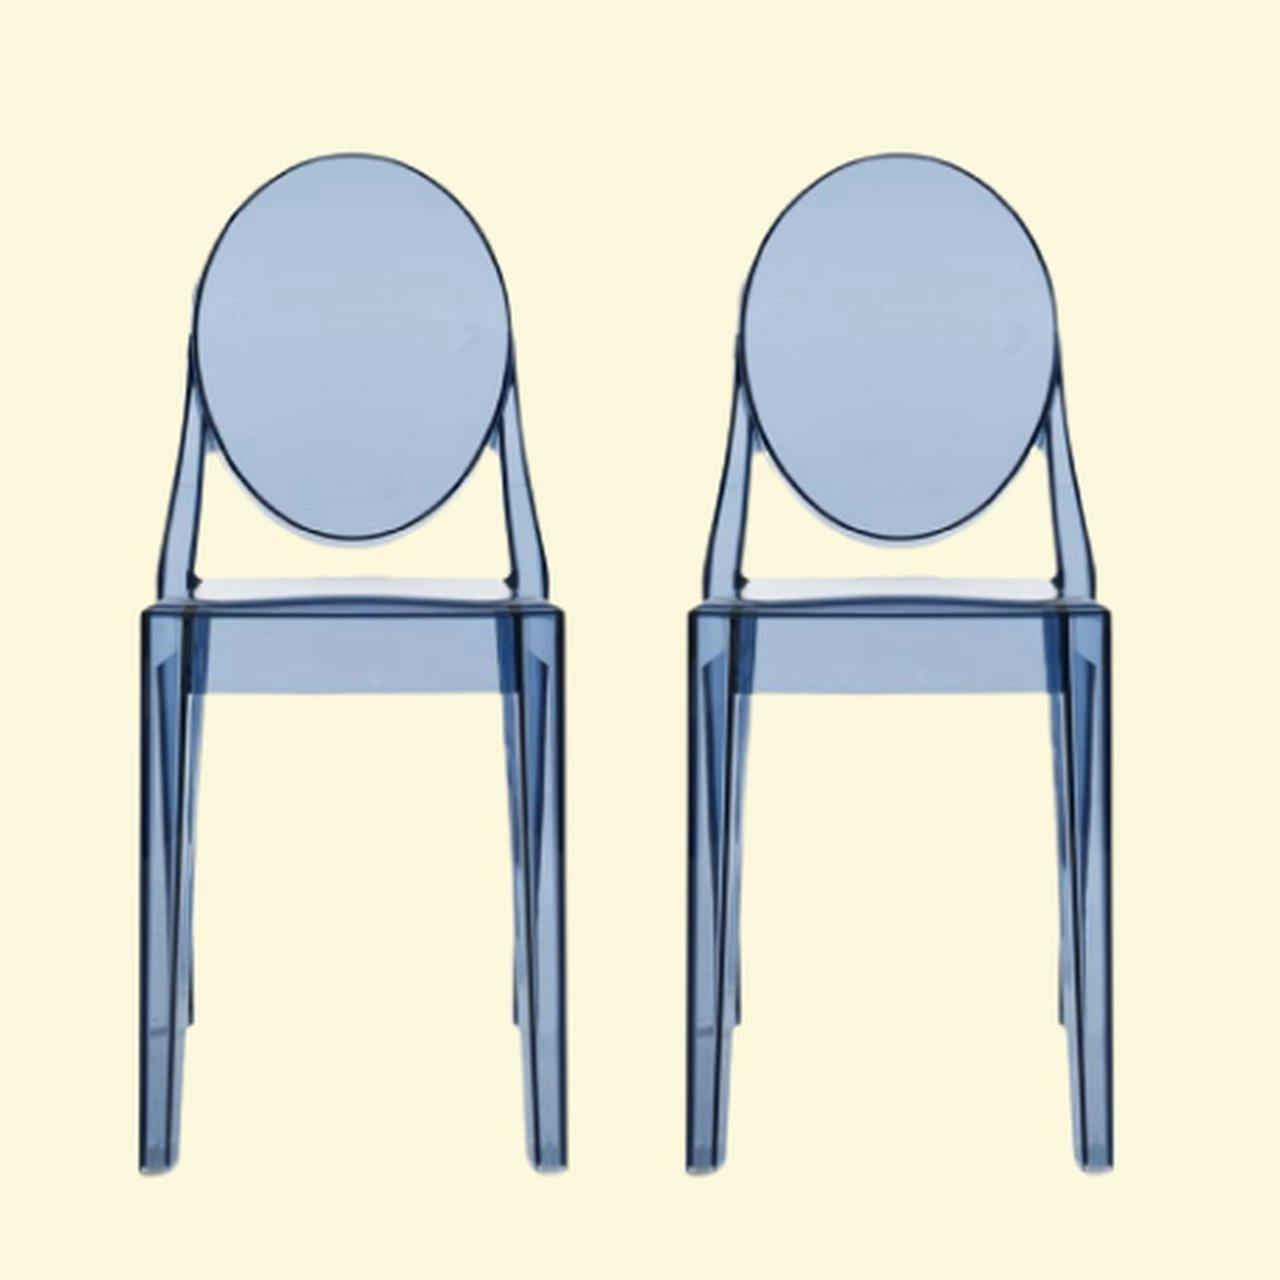 Ghyczy Dining chairs